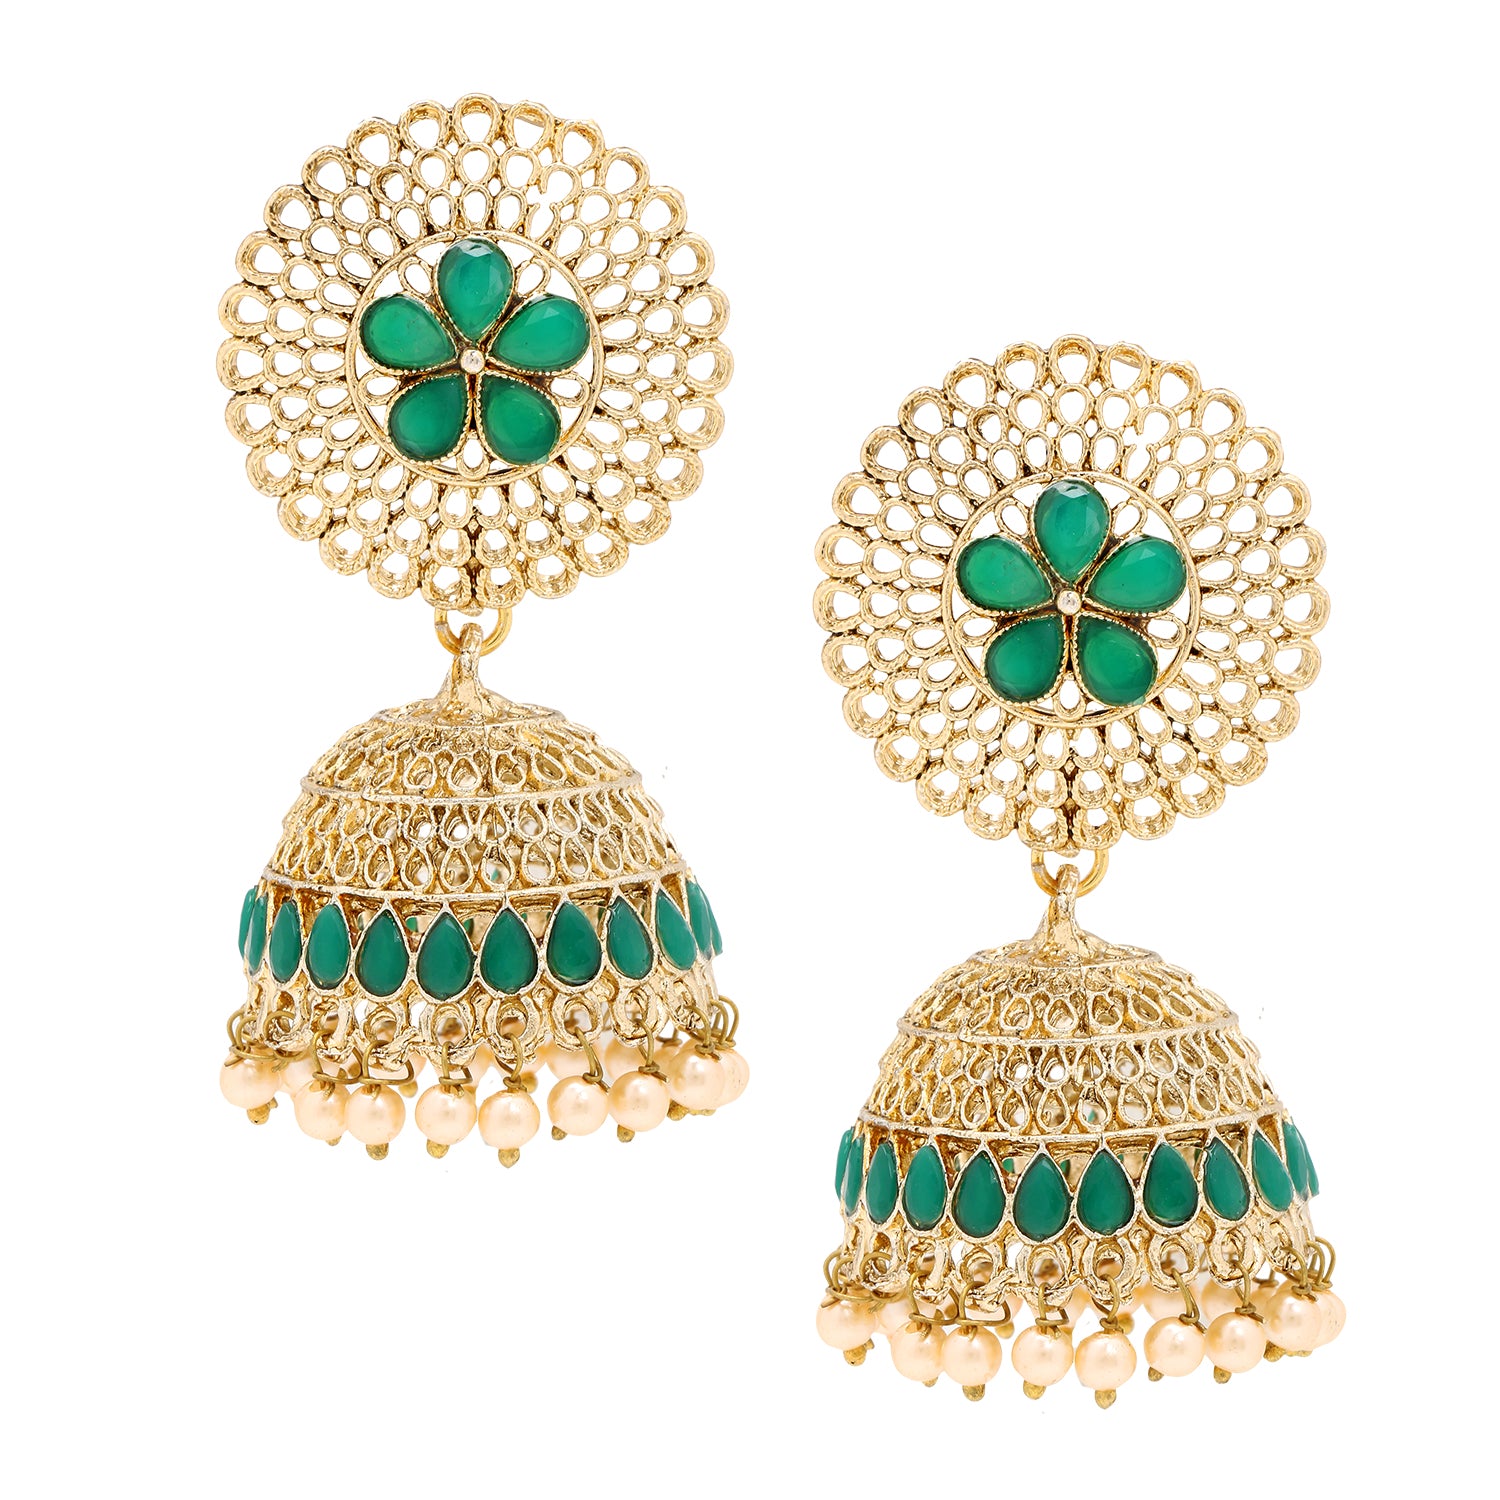 Gold Dome Shaped Jhumkas Earrings